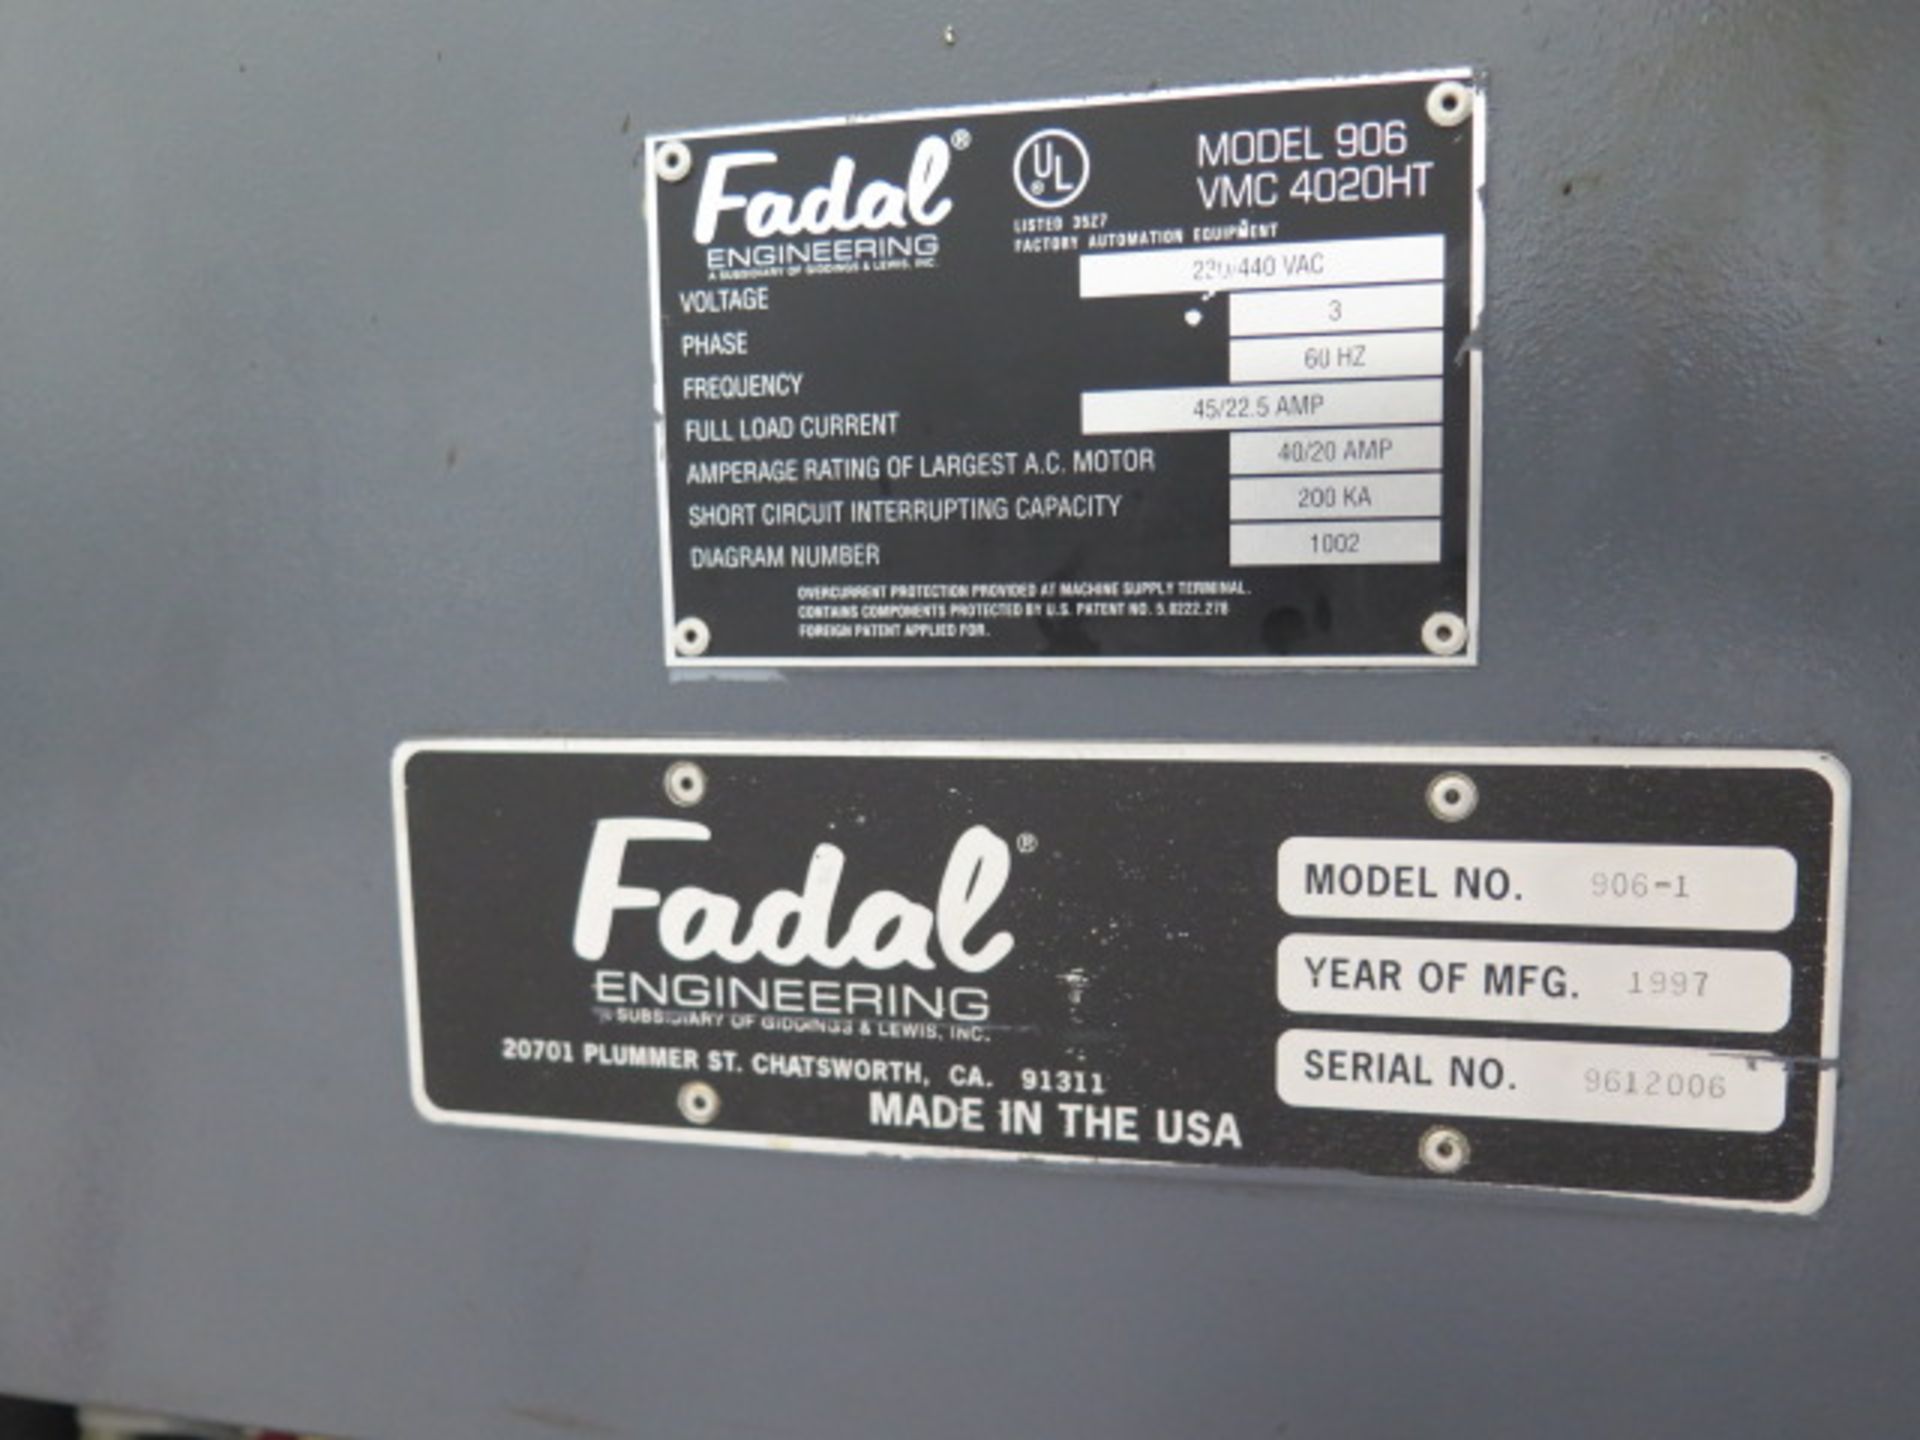 1997 Fadal VMC4020 4-Axis CNC VMC s/n 9612006 w/ Fadal Multi Processor CNC, SOLD AS IS - Image 12 of 14